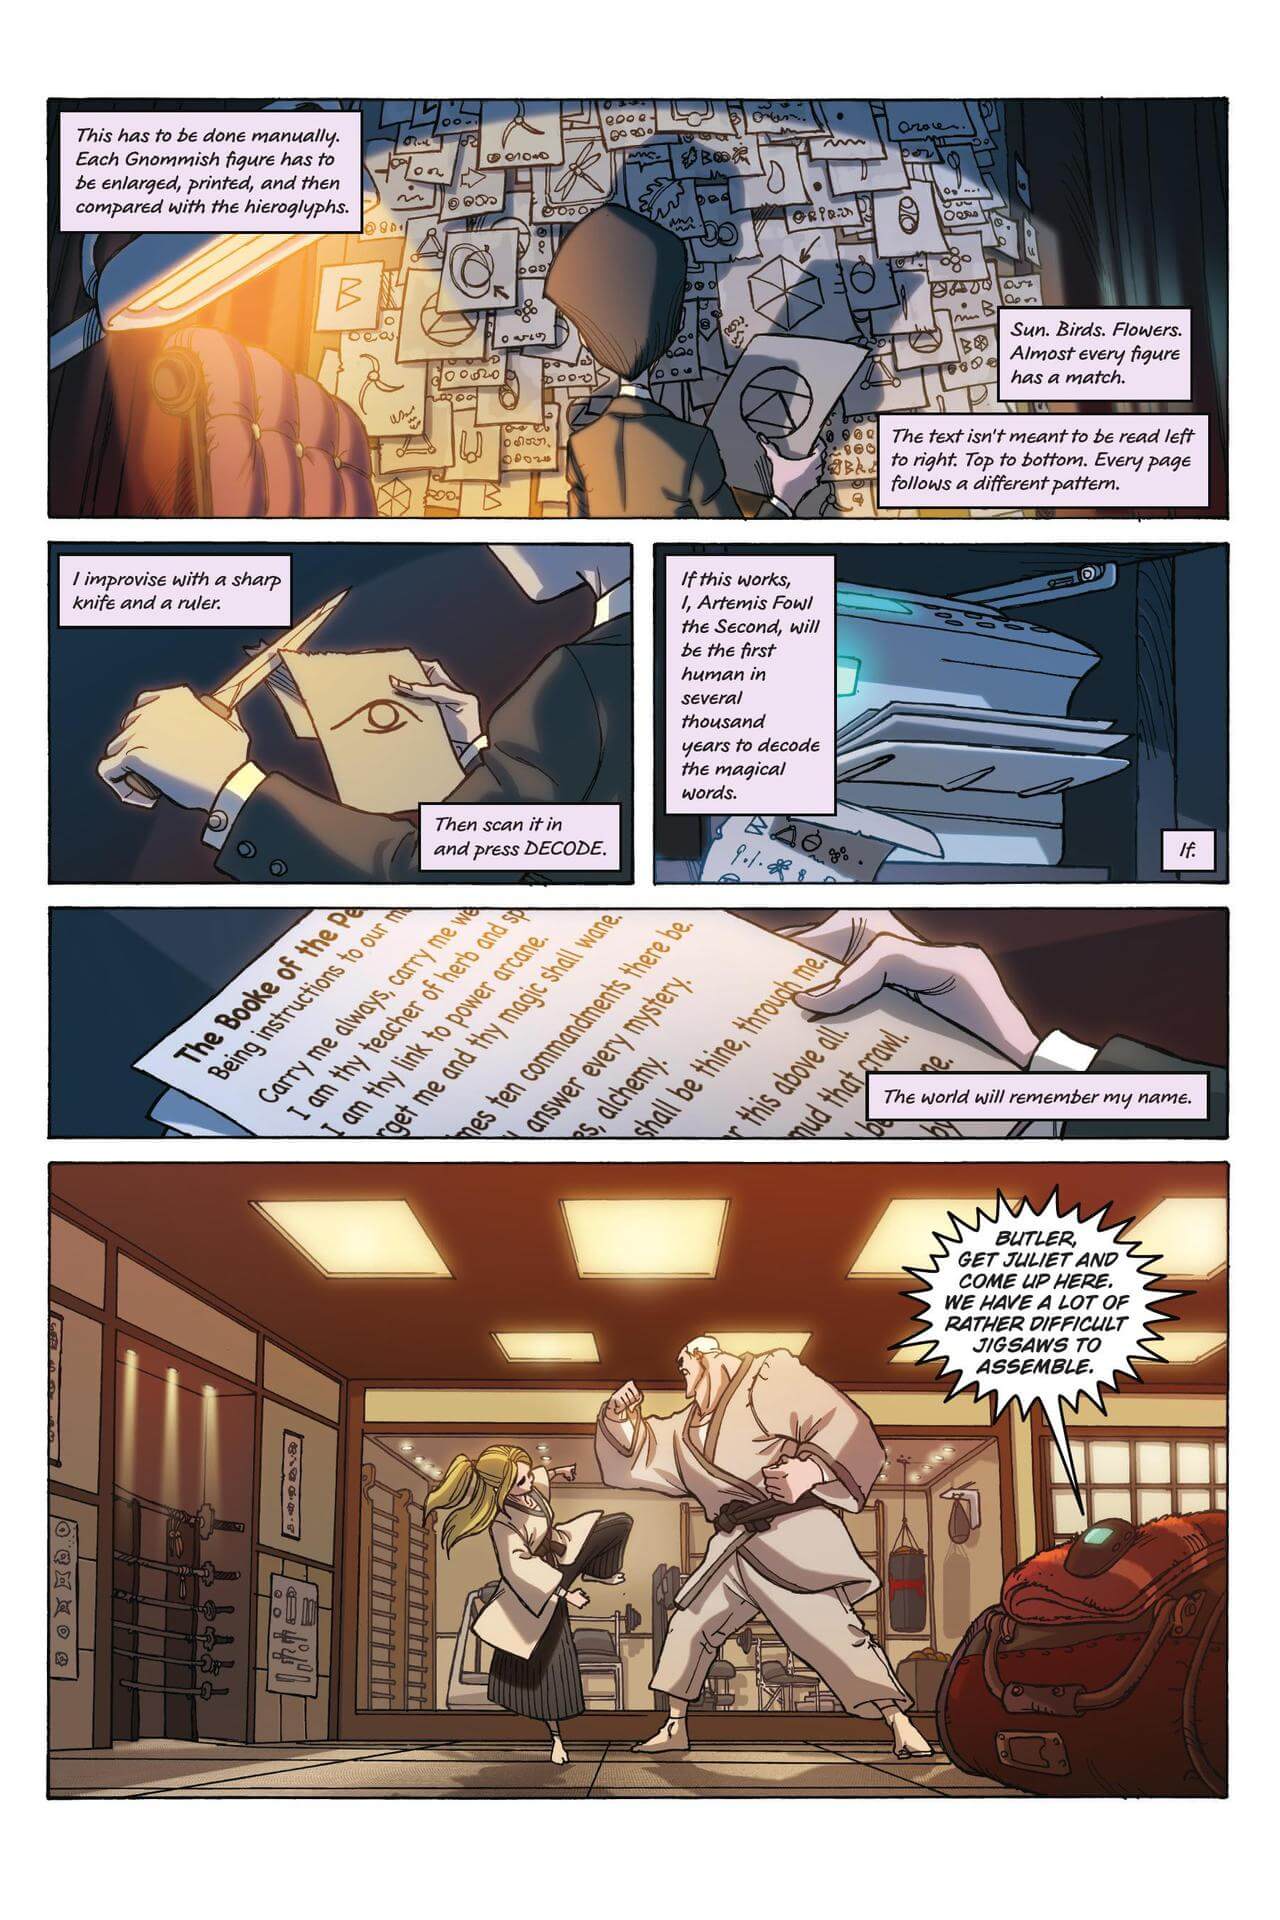 page 14 of artemis fowl the graphic novel